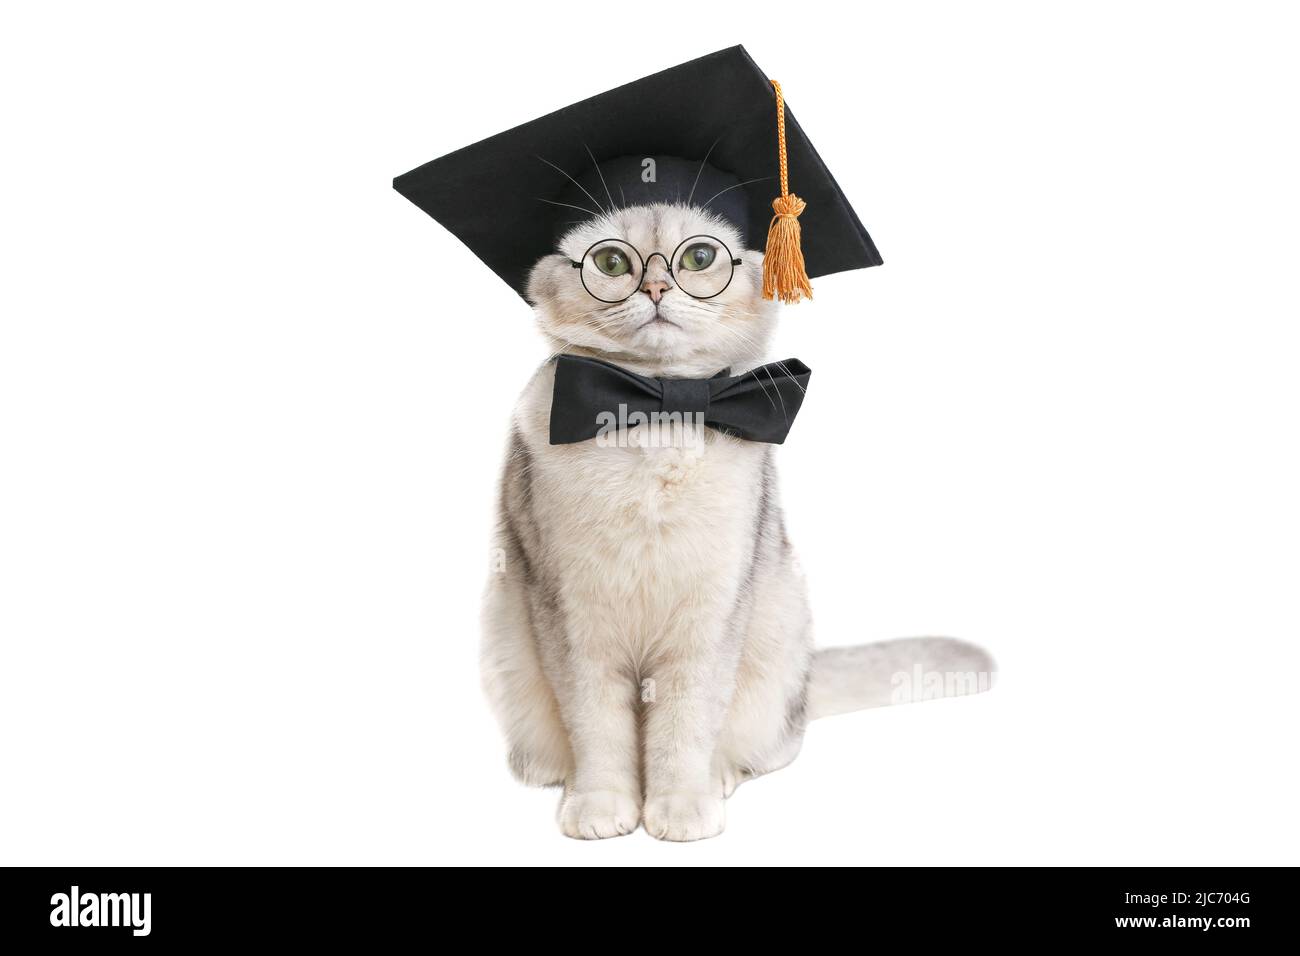 funny cat sits in a black graduation hat, bow tie and glasses, isolated on a white background Stock Photo